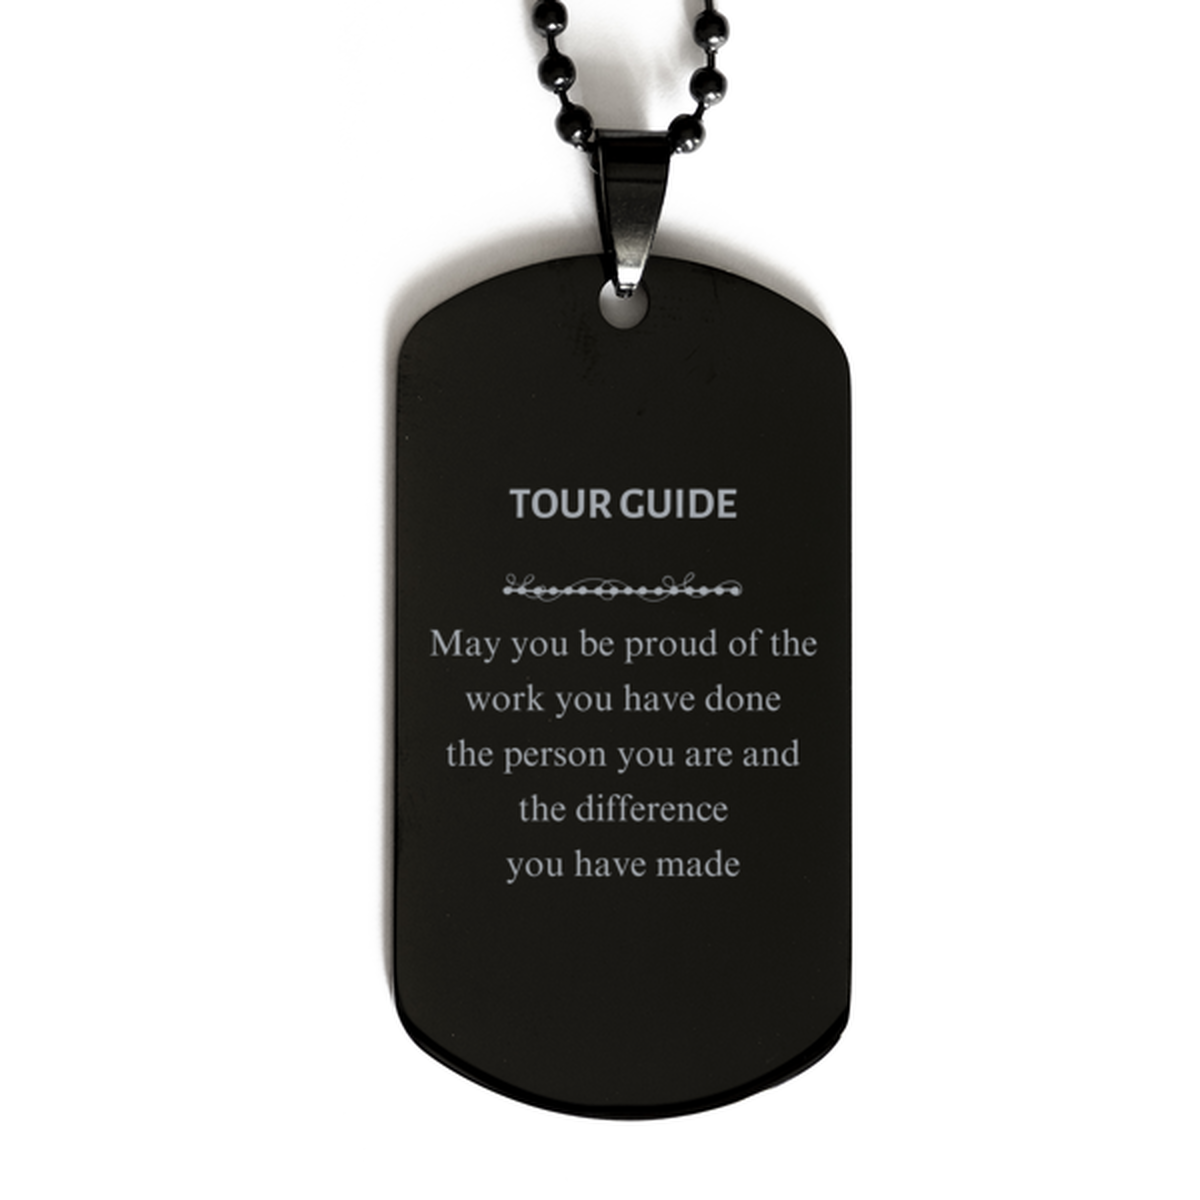 Tour Guide May you be proud of the work you have done, Retirement Tour Guide Black Dog Tag for Colleague Appreciation Gifts Amazing for Tour Guide